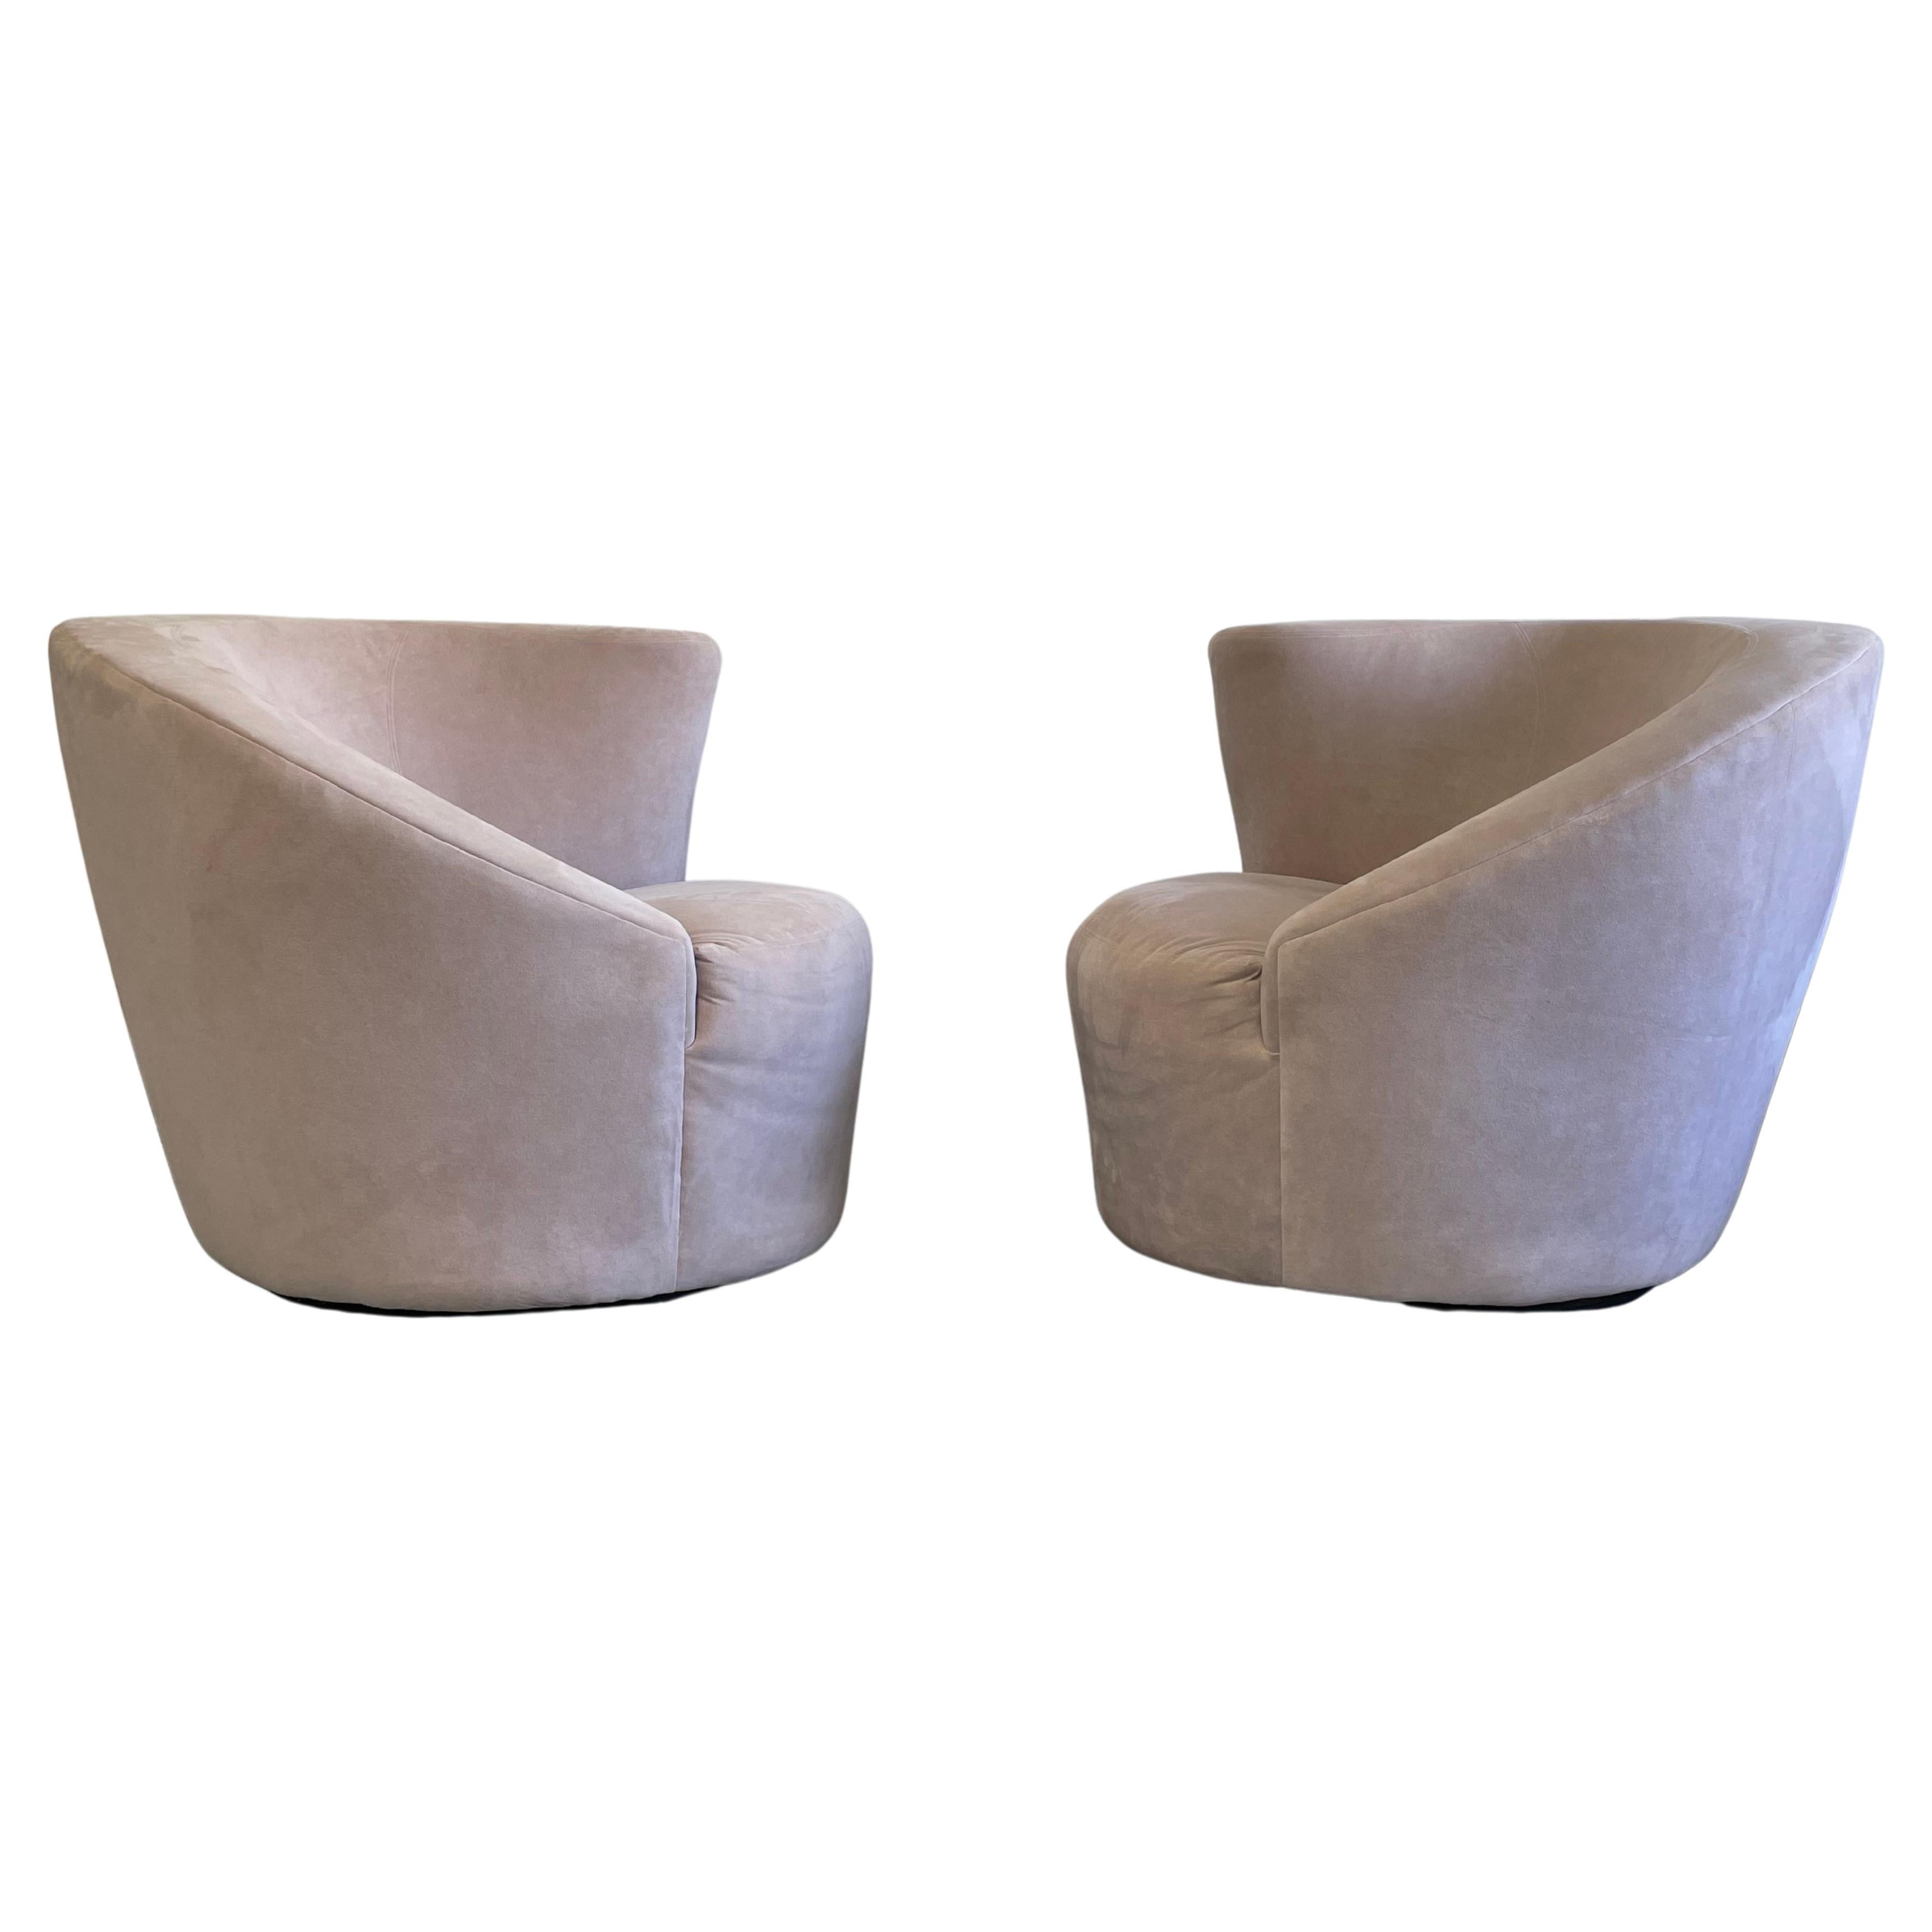 Corkscrew or Nautilus Swivel Chairs by Directional For Sale